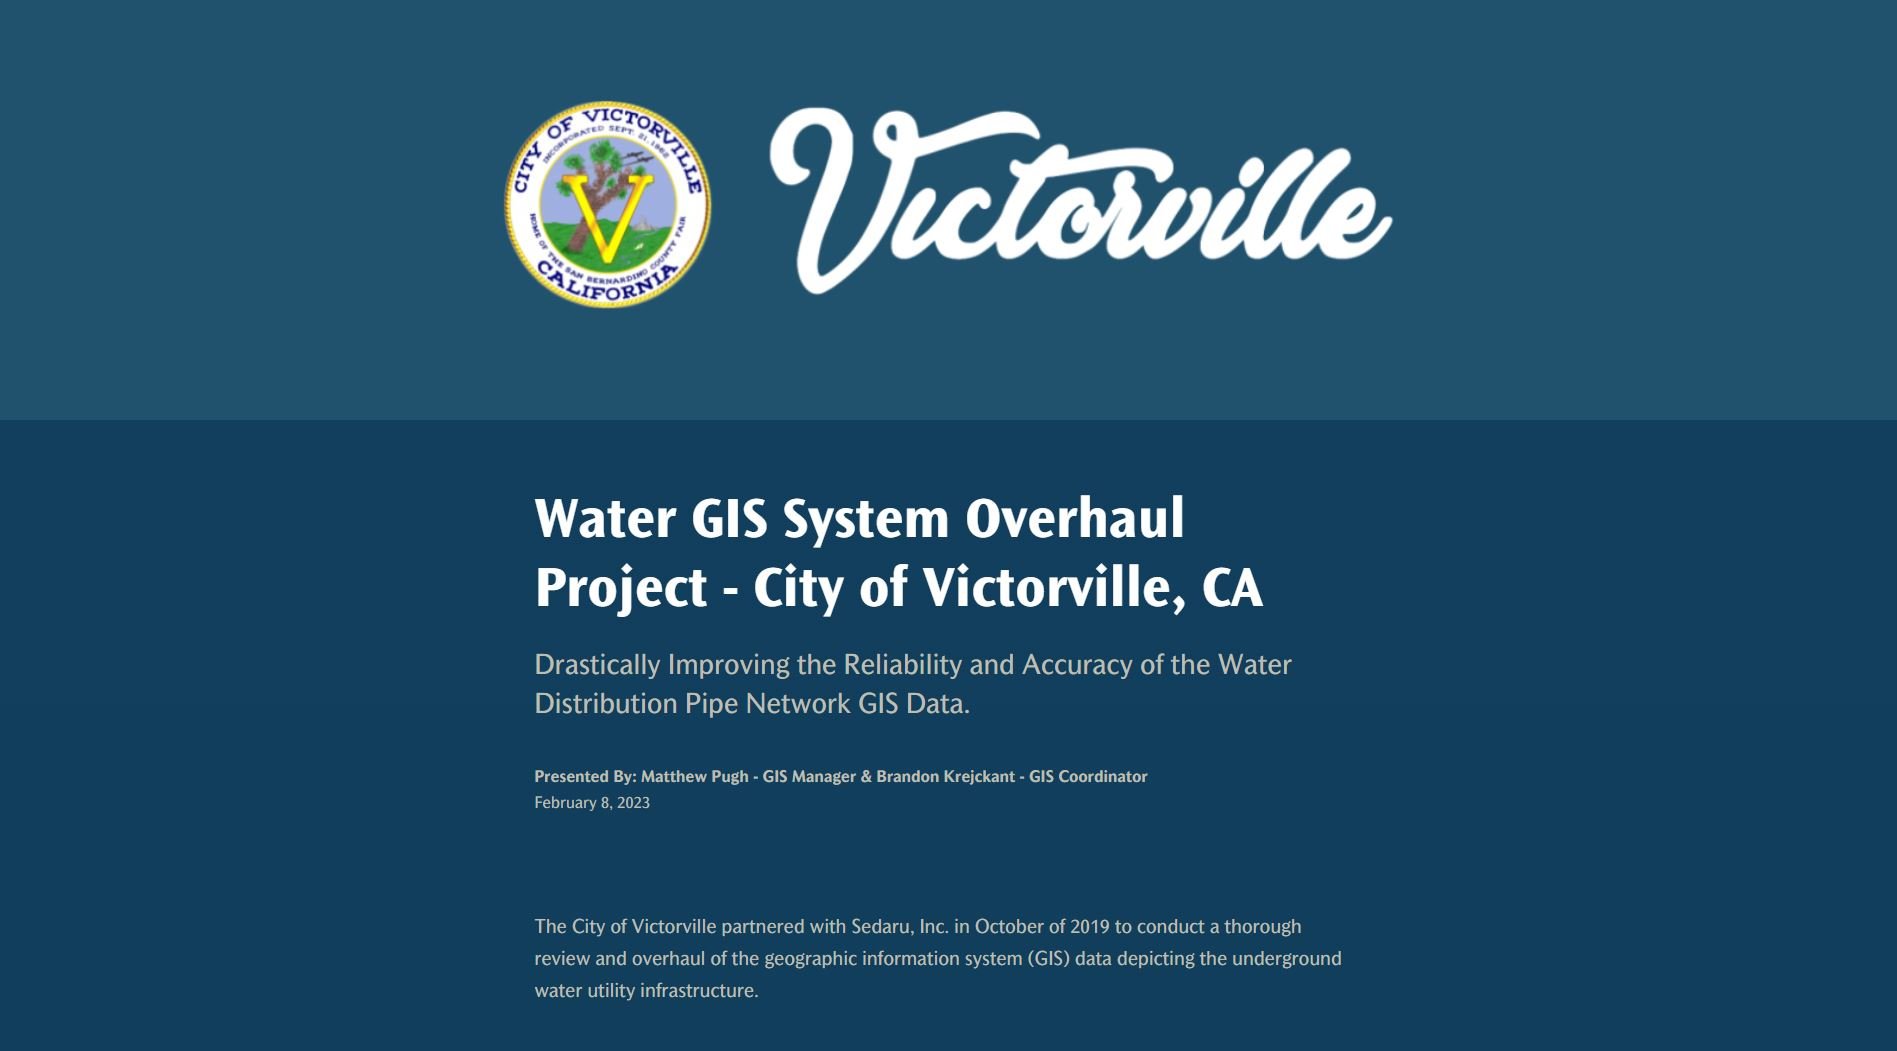 Water GIS System Overhaul Project - City of Victorville - Created by Matthew Pugh